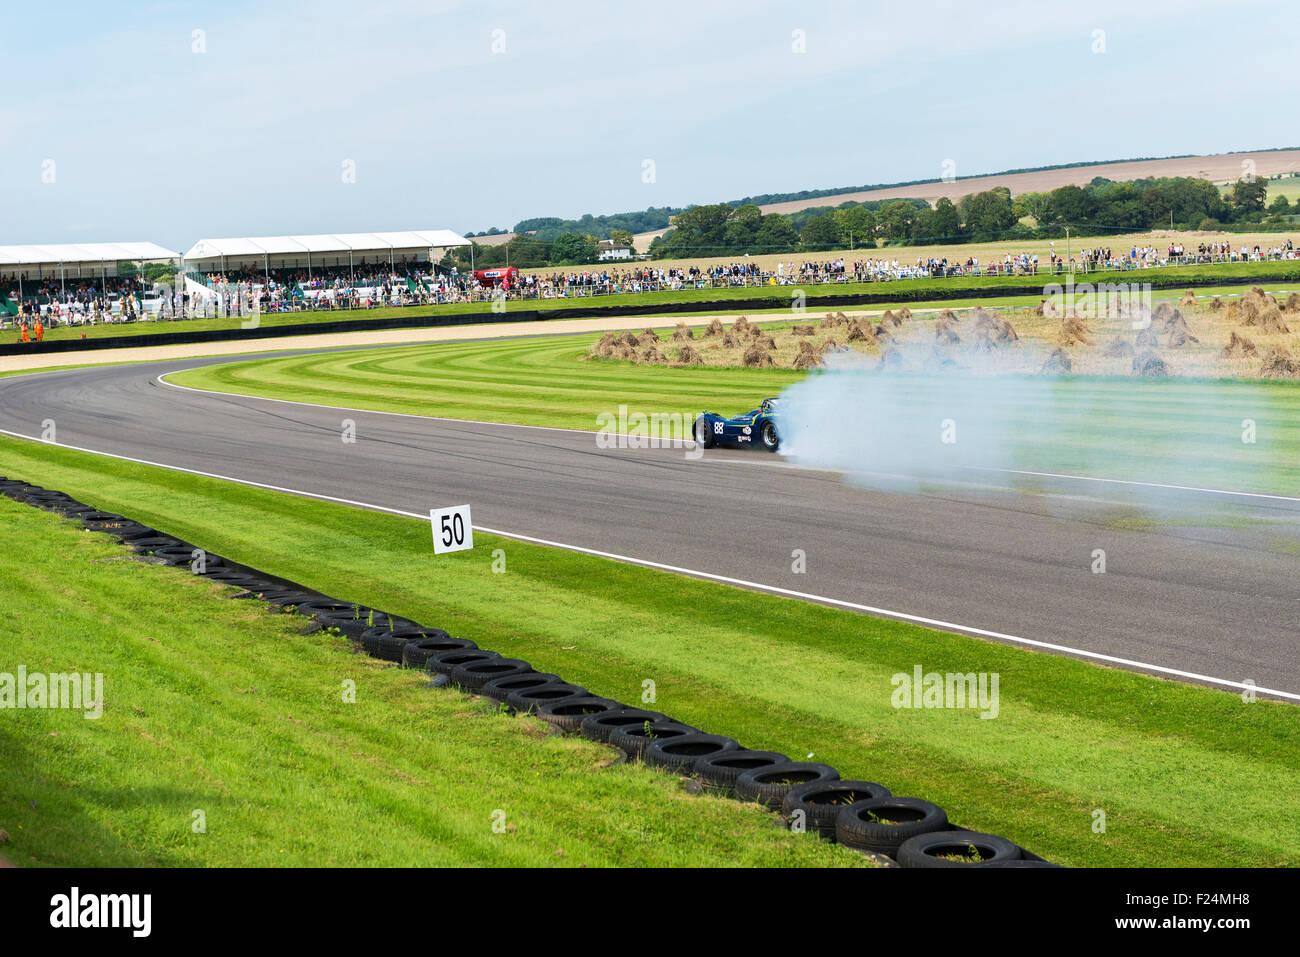 Goodwood, Chichester, West Sussex, UK. 11th September, 2015.  Image showing,Motorsport action thrills and spills during fridays practice session, with race losing traction and spinning out control showing crowds in background and smoke pouring from car tires. Stock Photo